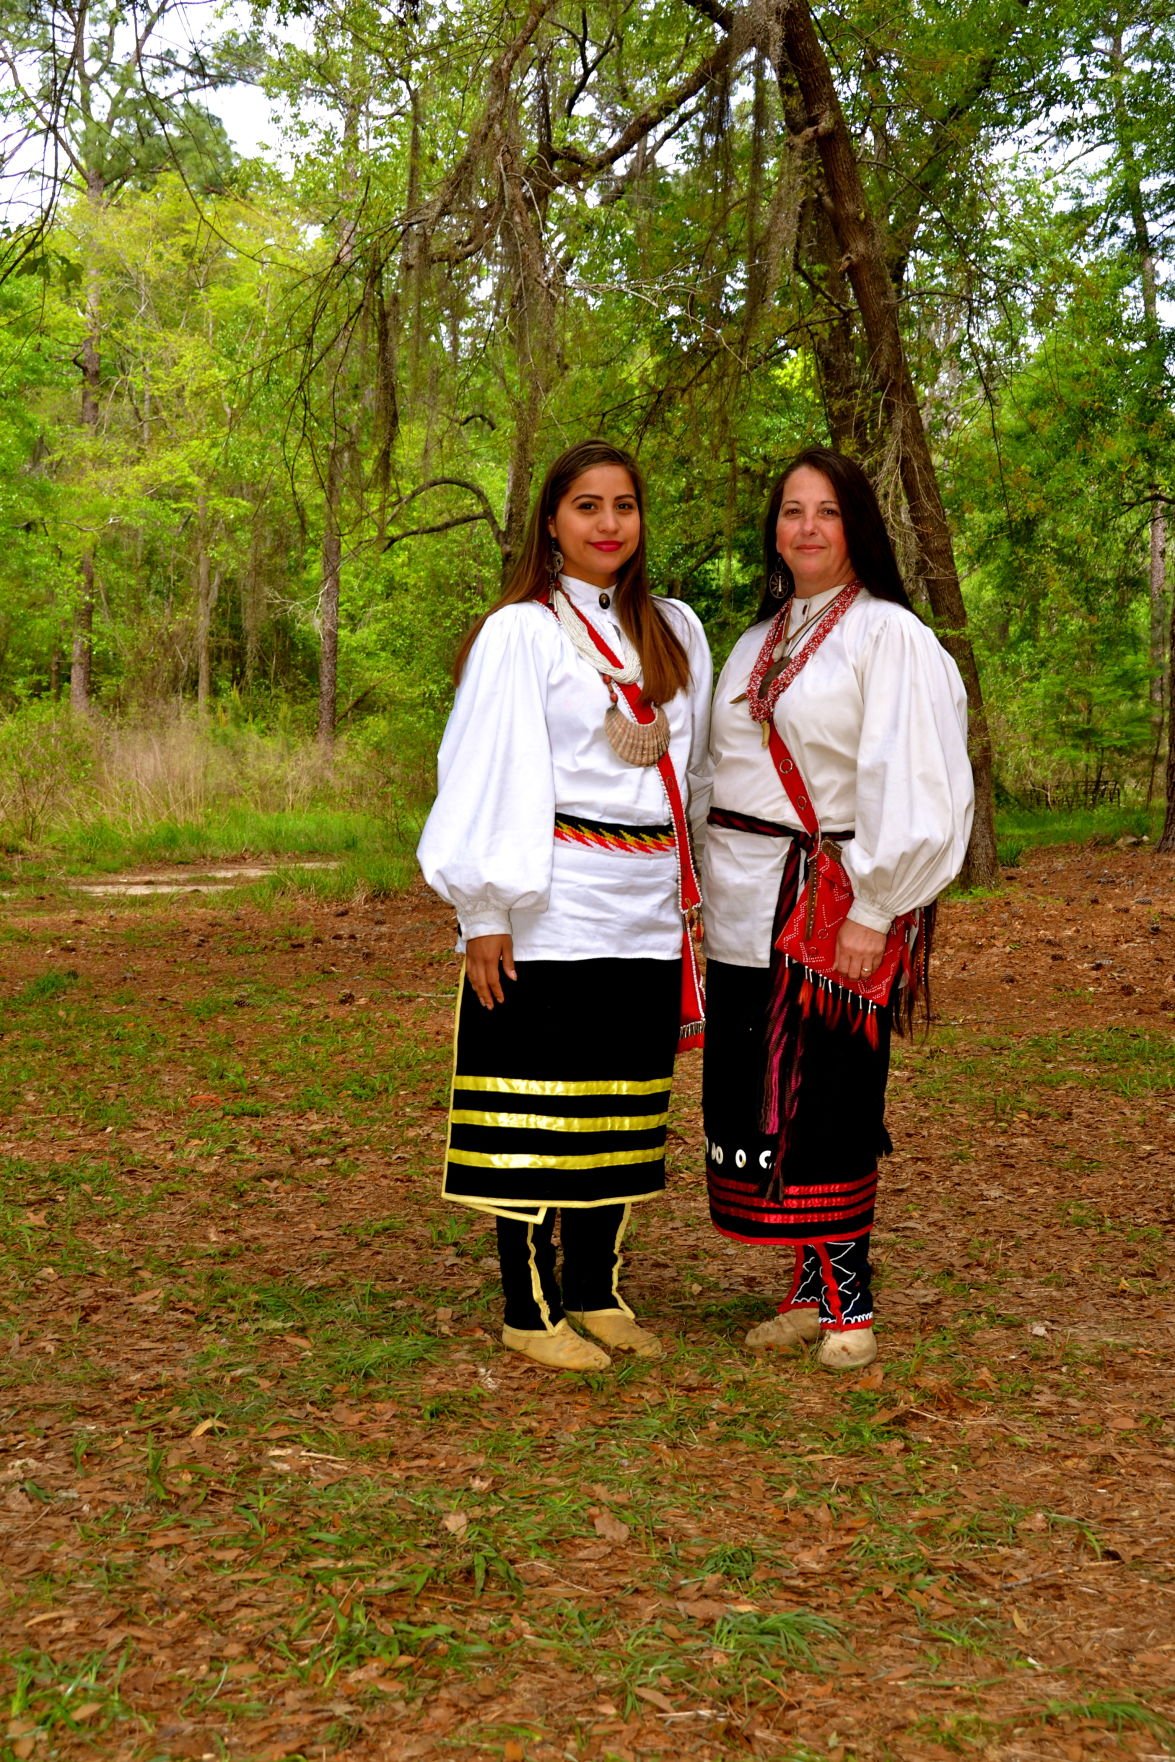 Cherokee Indian Festival returns this weekend Lifestyle